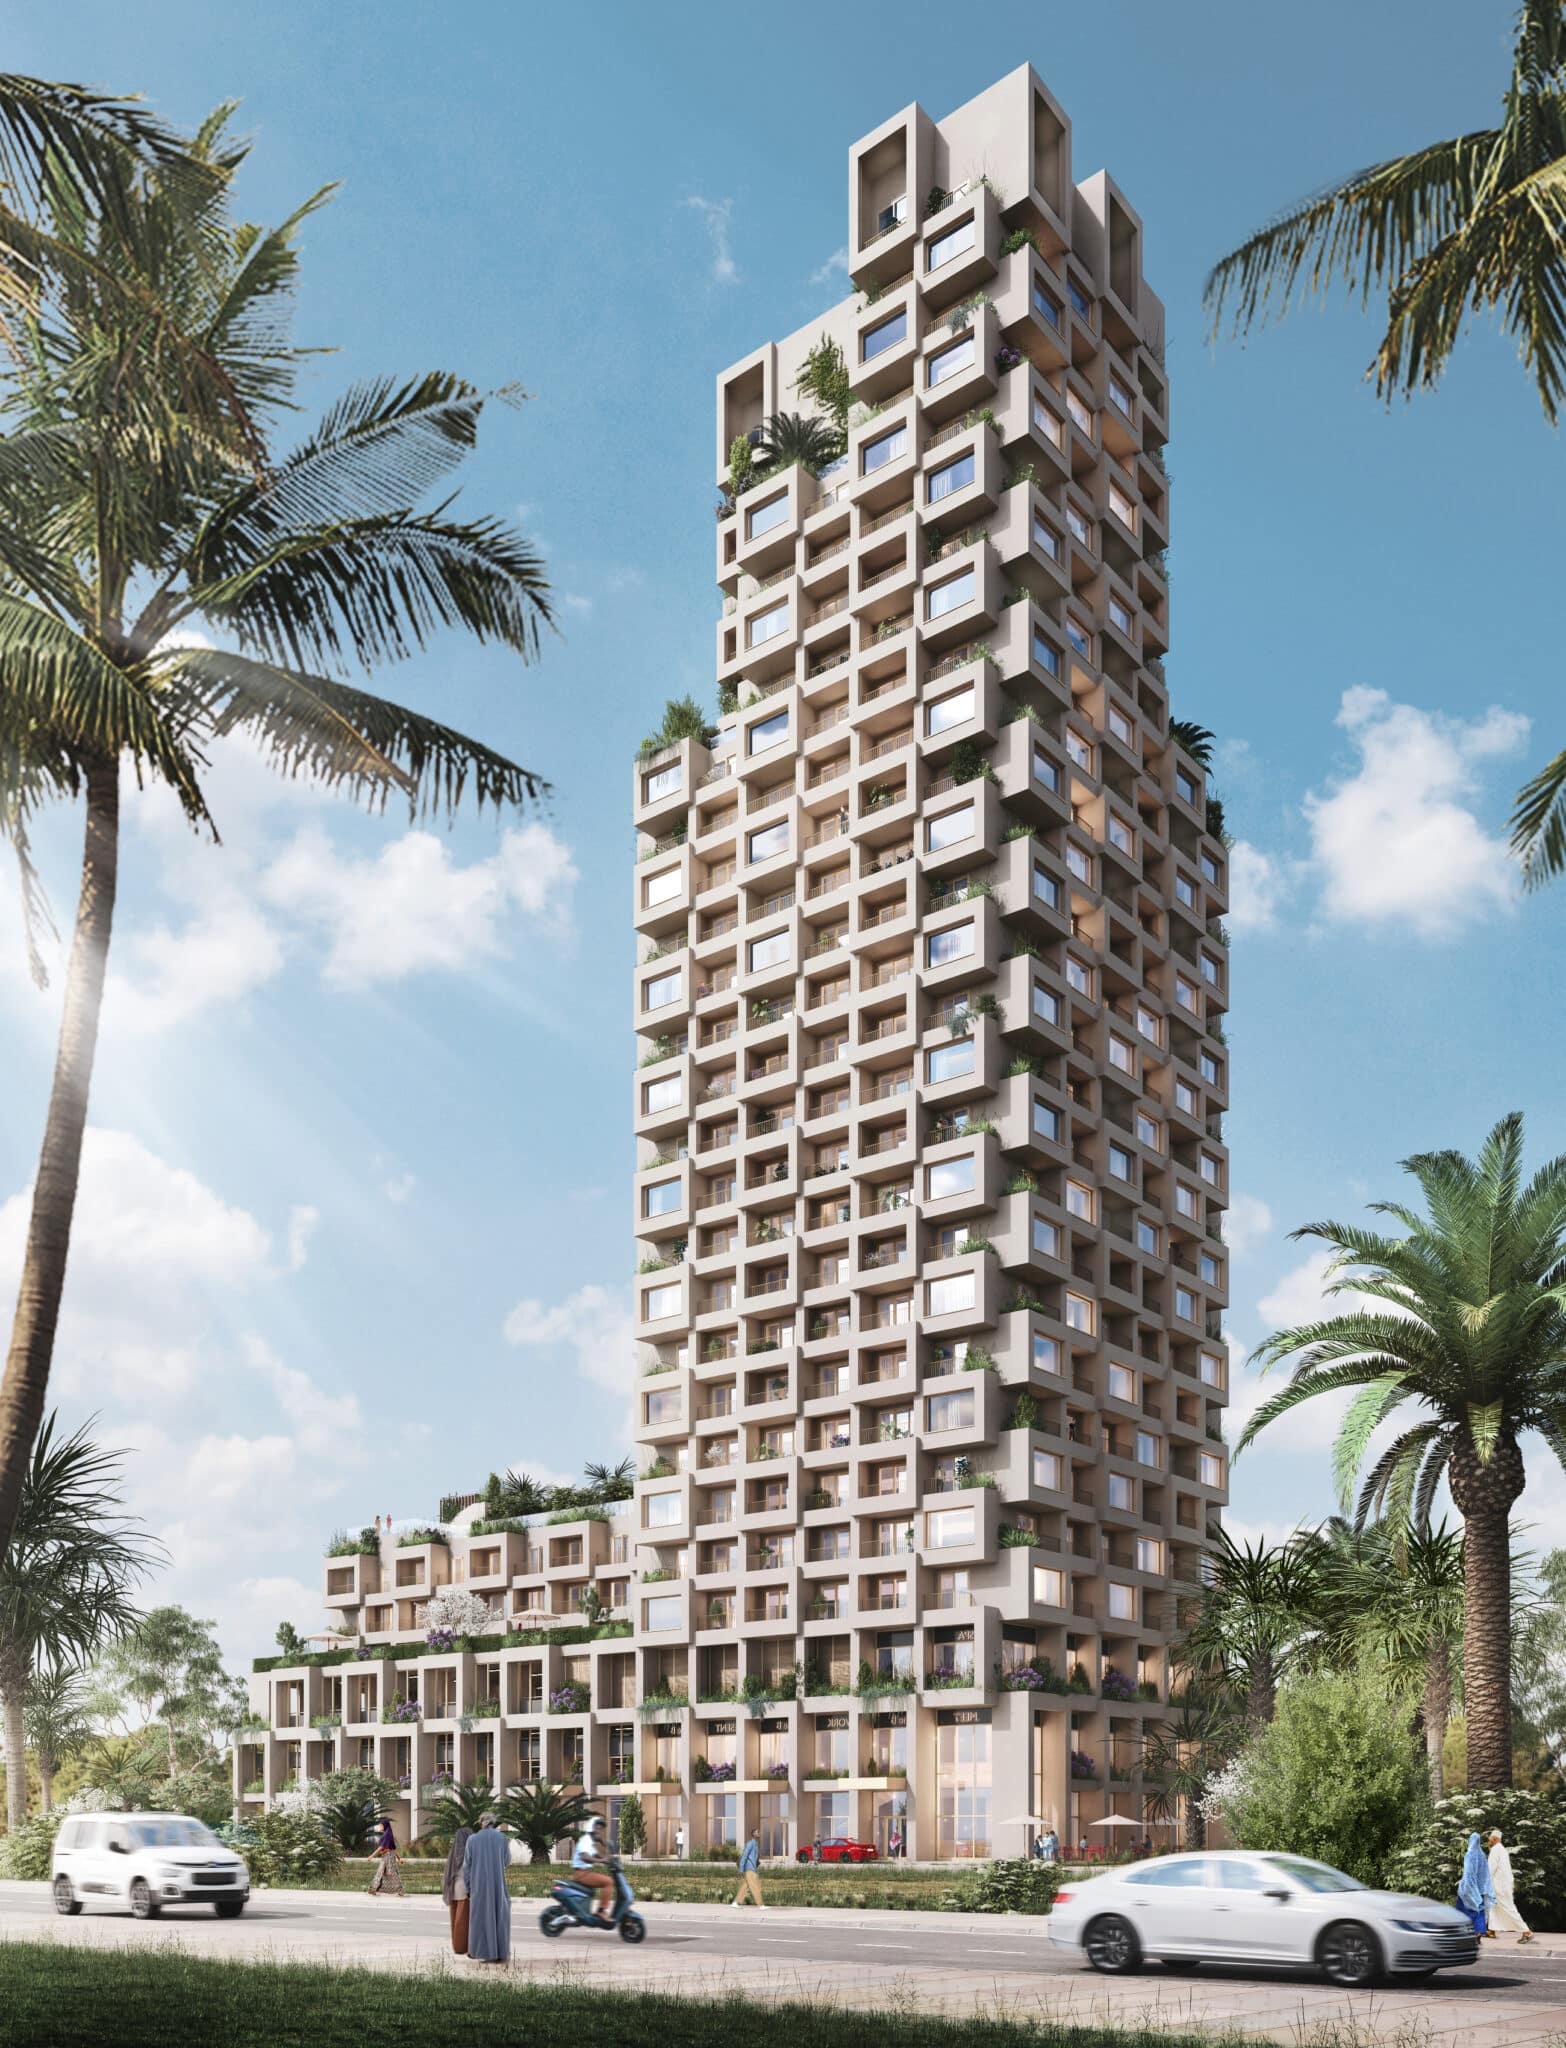 World’s Tallest Timber Apartment Tower To Be Built In Zanzibar